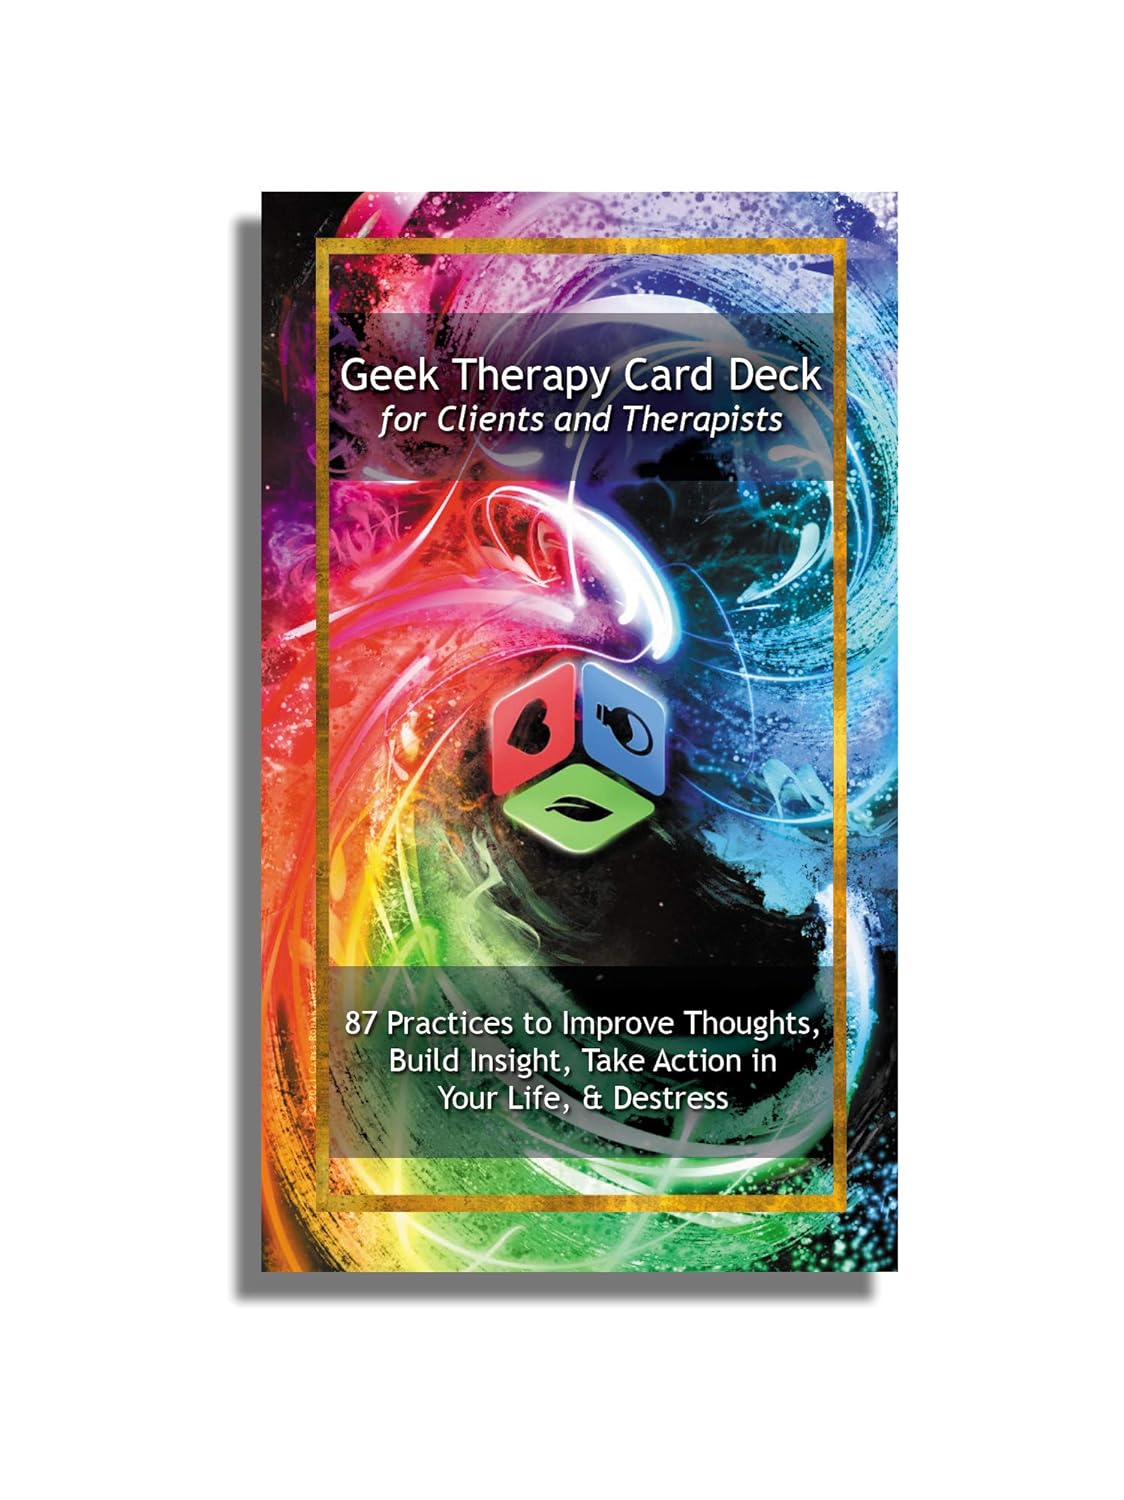 Geek Therapy Card Deck For Clients and Therapists: 87 Practices To Improve Thoughts, Build Insight, Take Action in Your life, & Destress